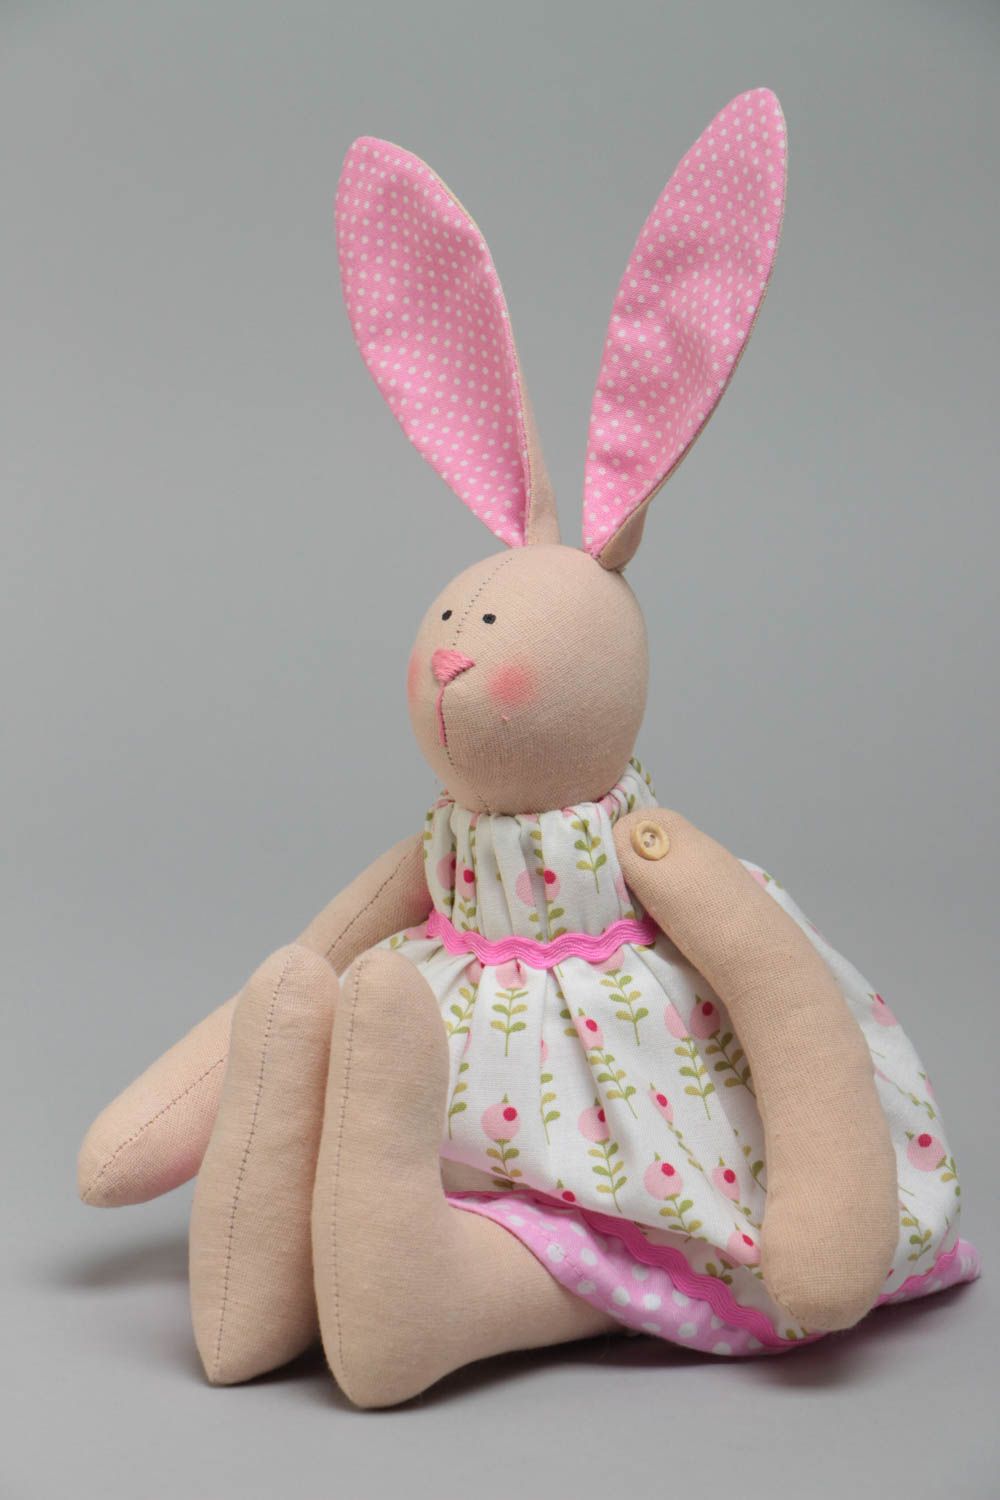 Handmade cotton fabric soft toy rabbit in floral dress with pink polka dot ears photo 2